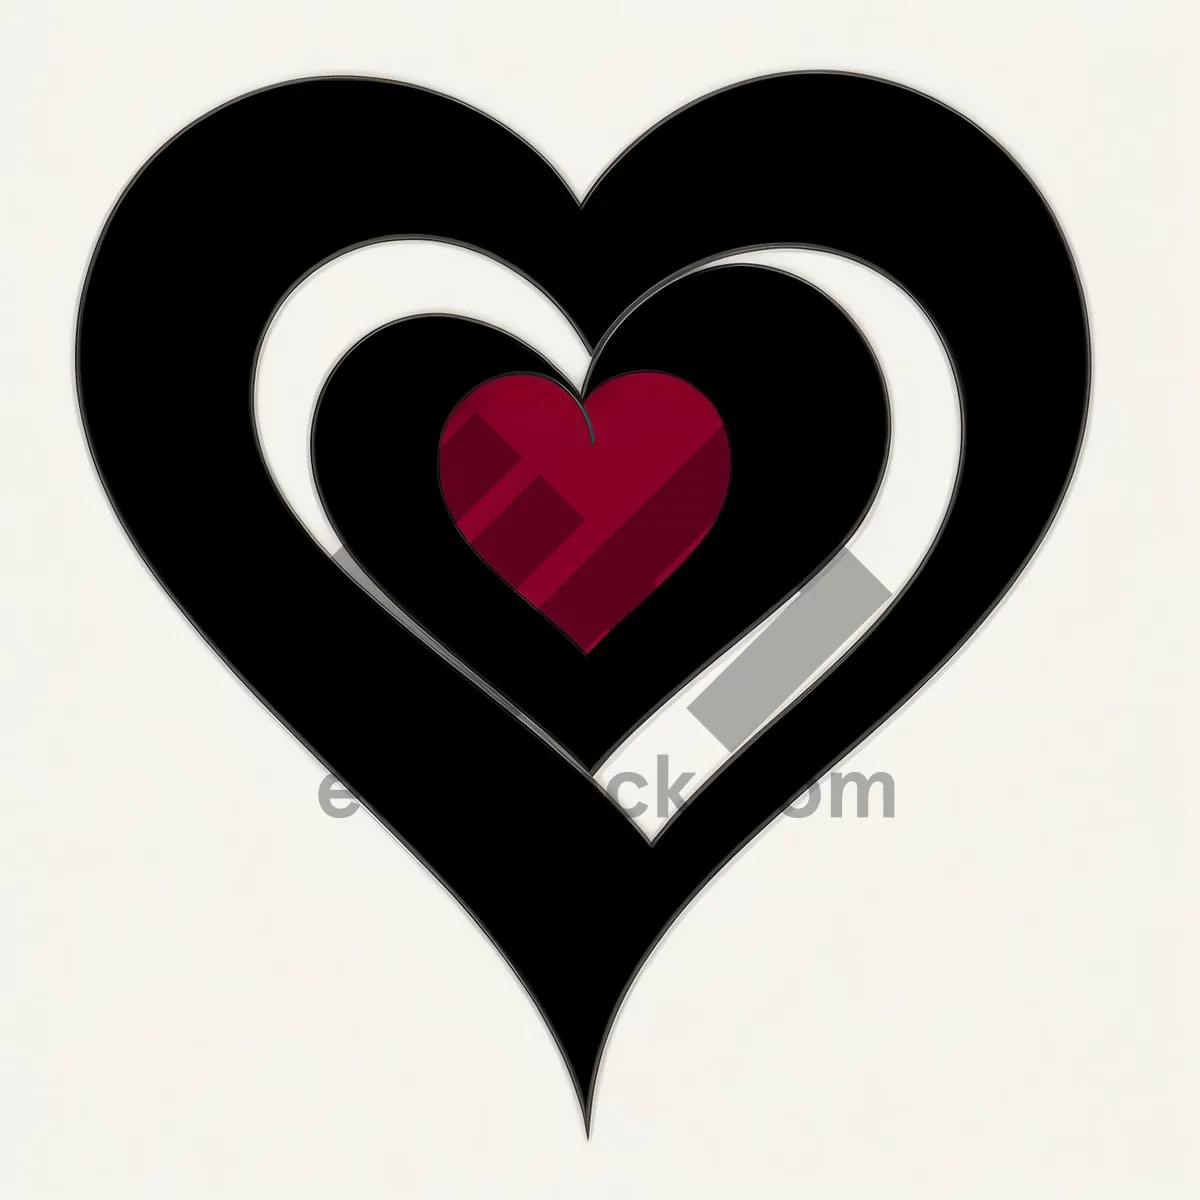 Picture of Heart Love: Symbol of Romance and Passion